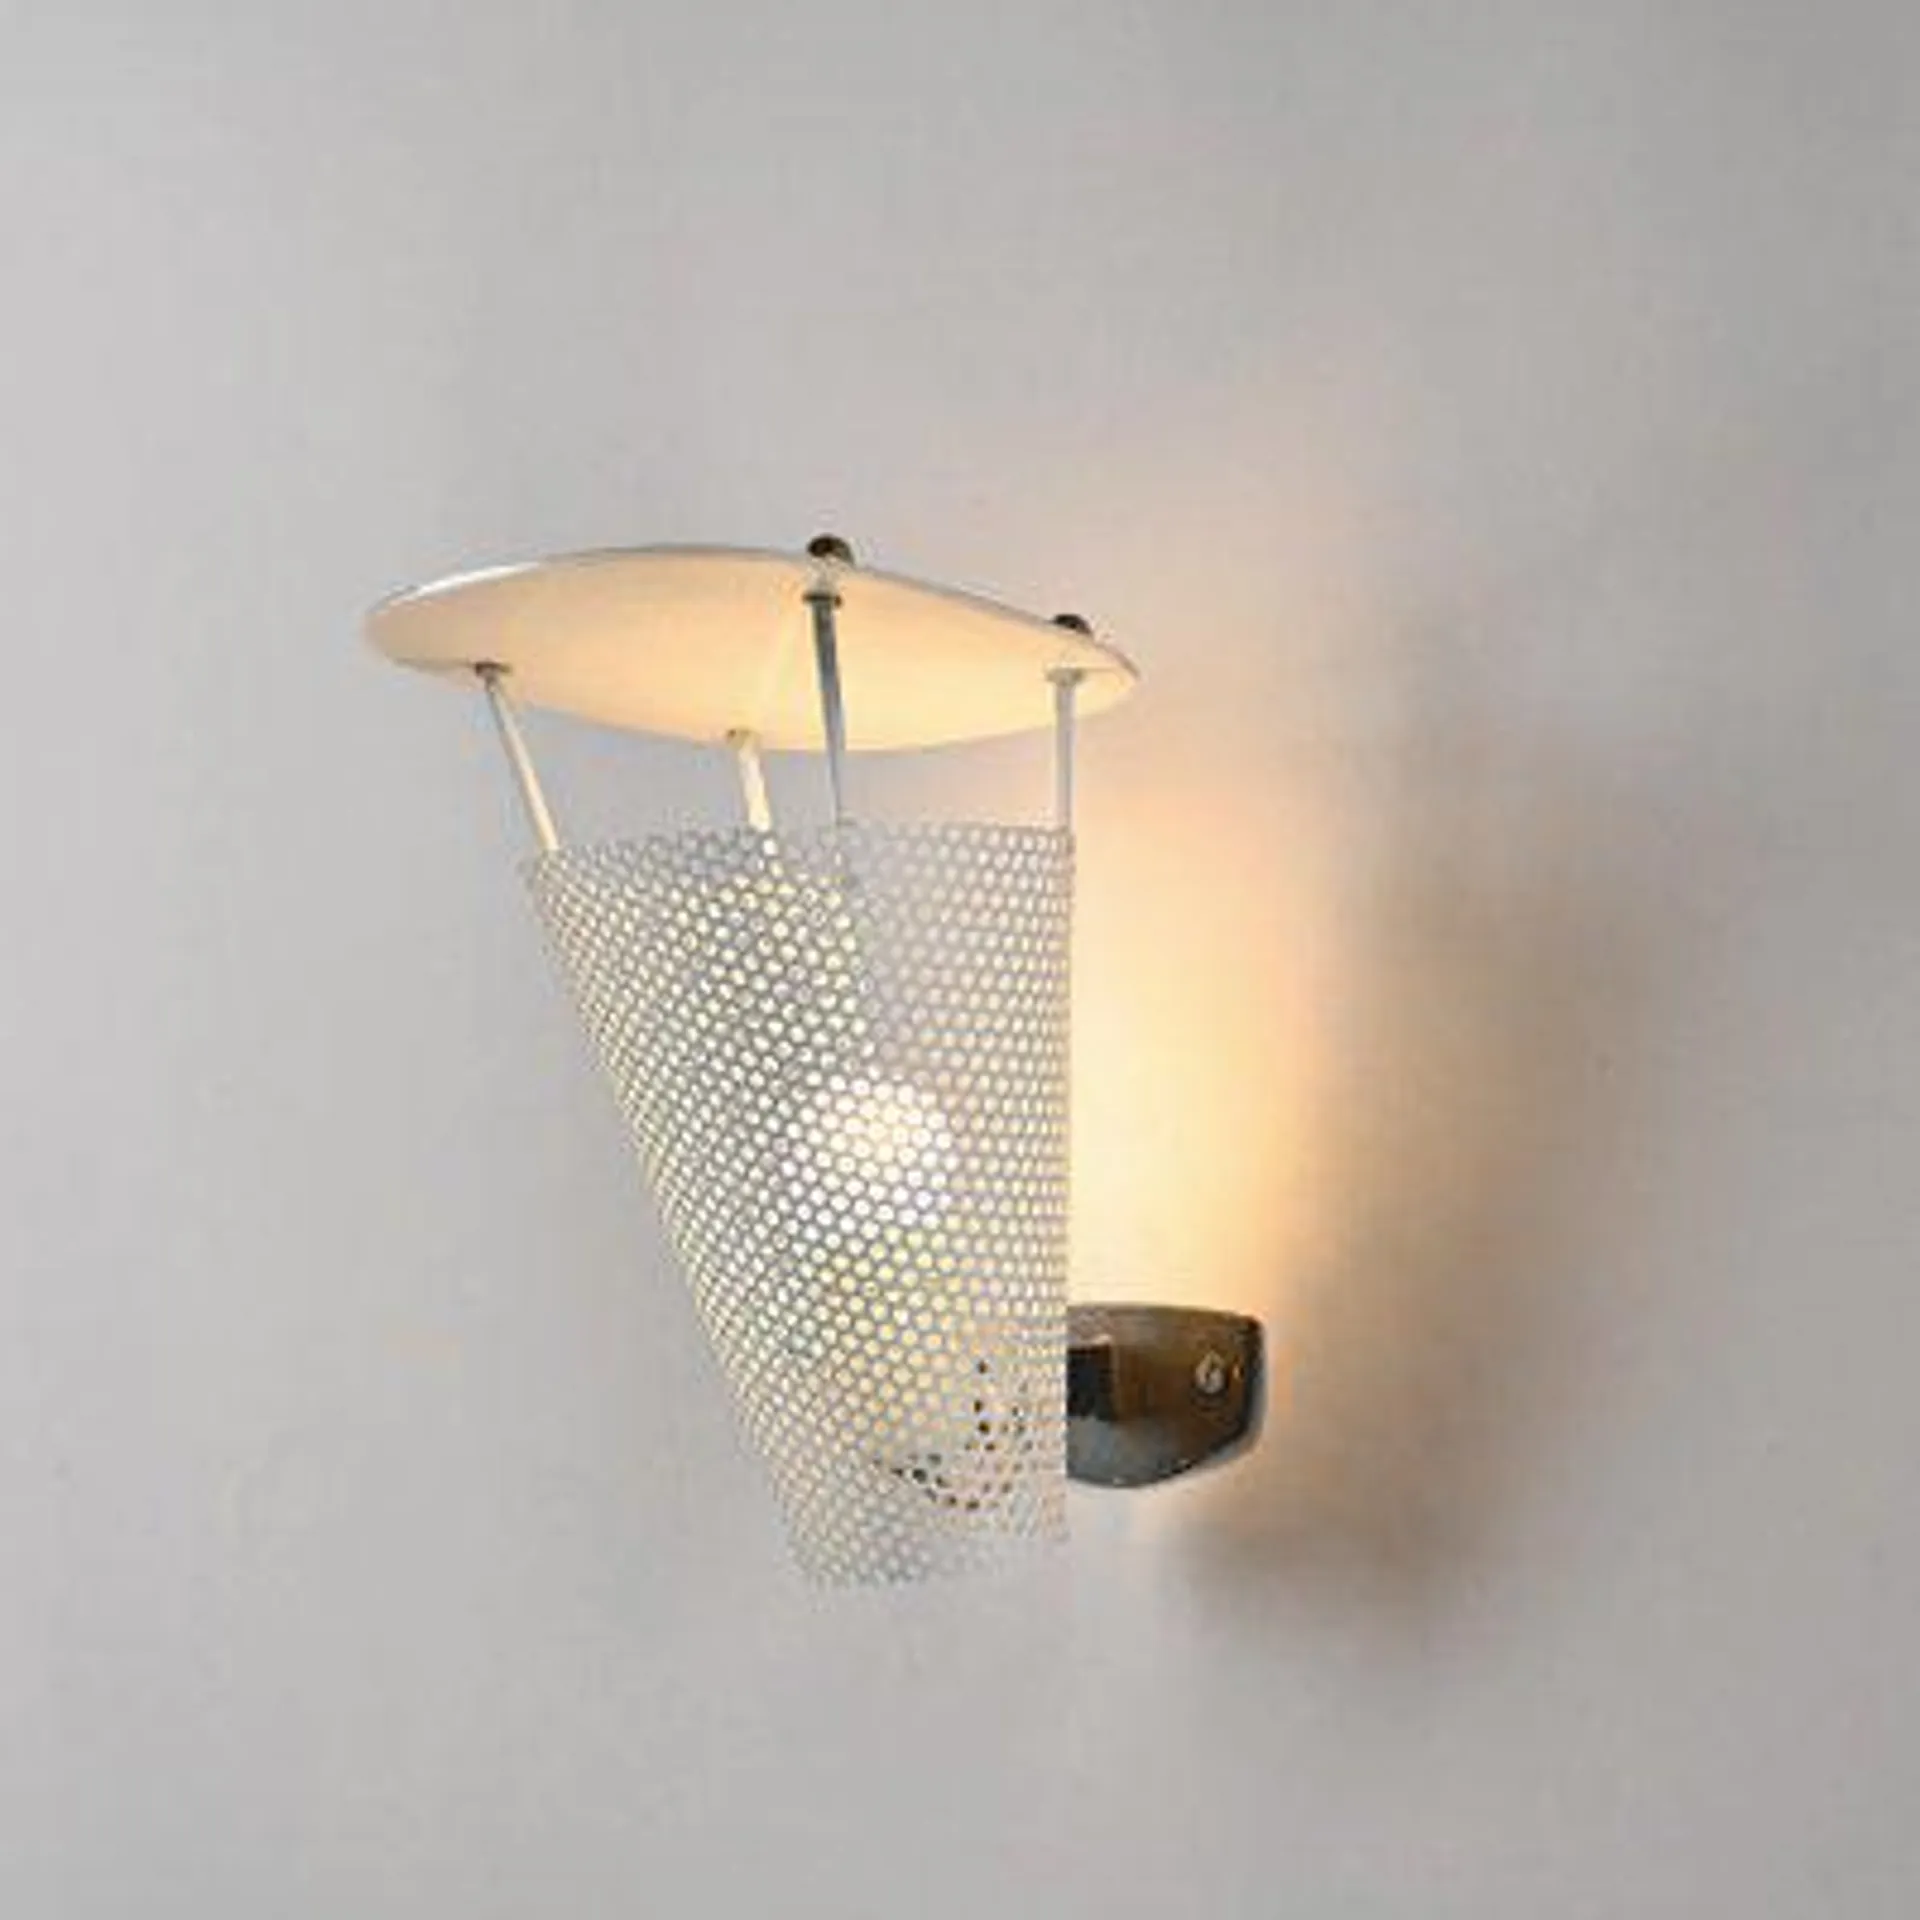 Vintage French Wall Sconce in Perforated Métal, 1950s